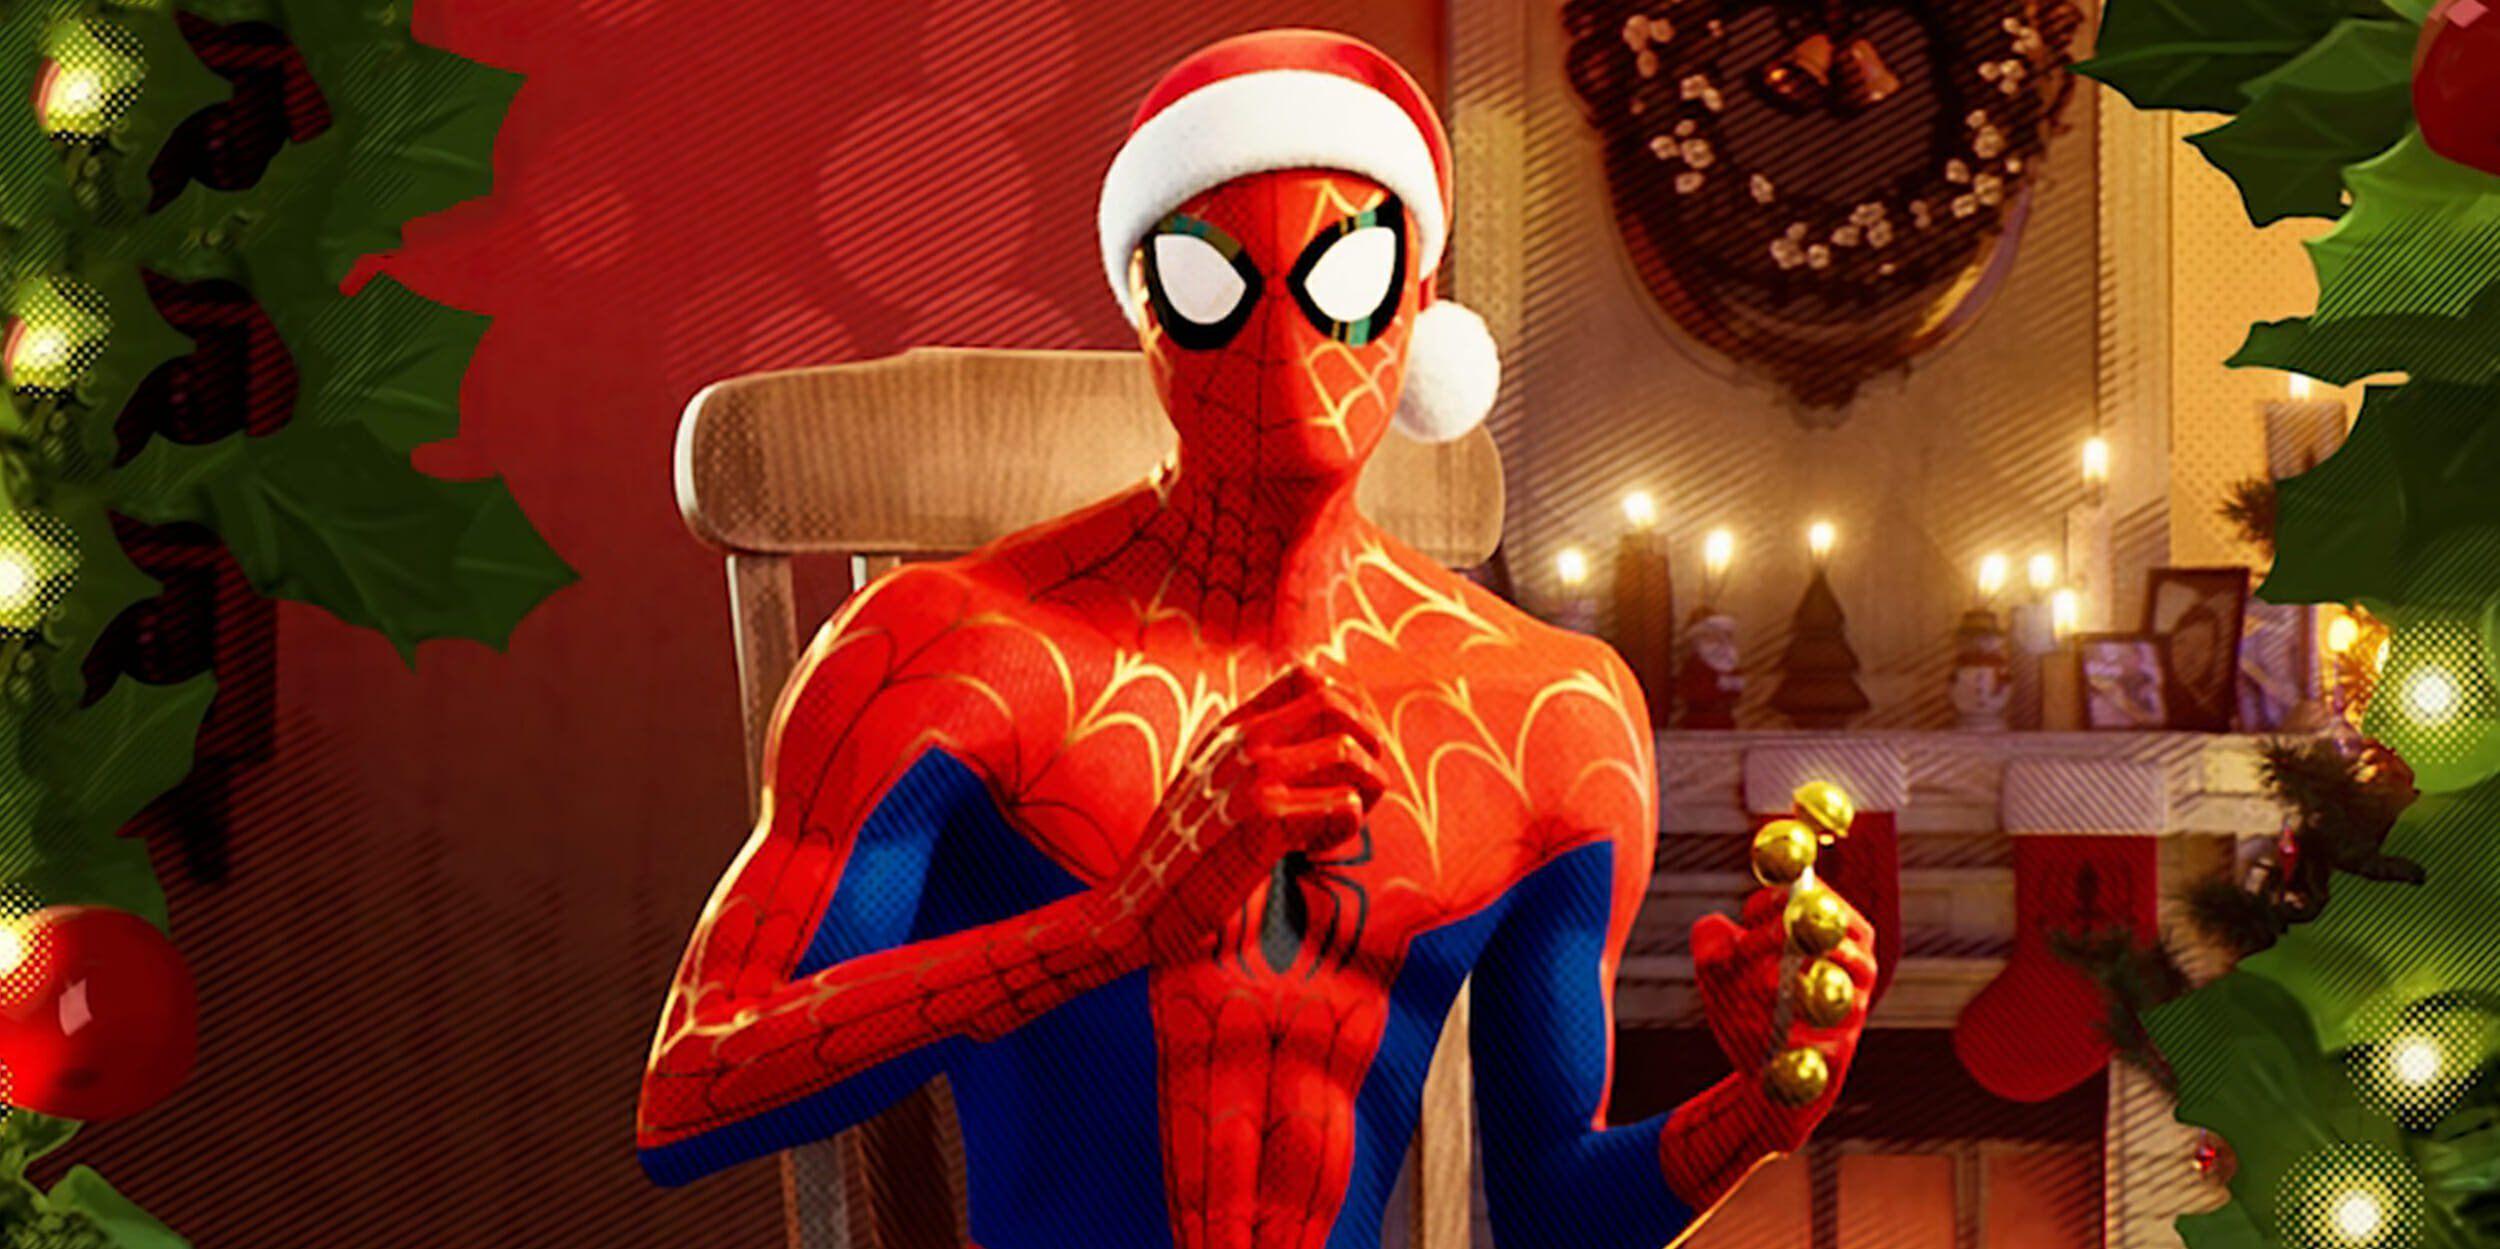 Merry Christmas from Miles Morales Fan Art  Spiderman  Spiderman comic  Miles spiderman Miles morales spiderman